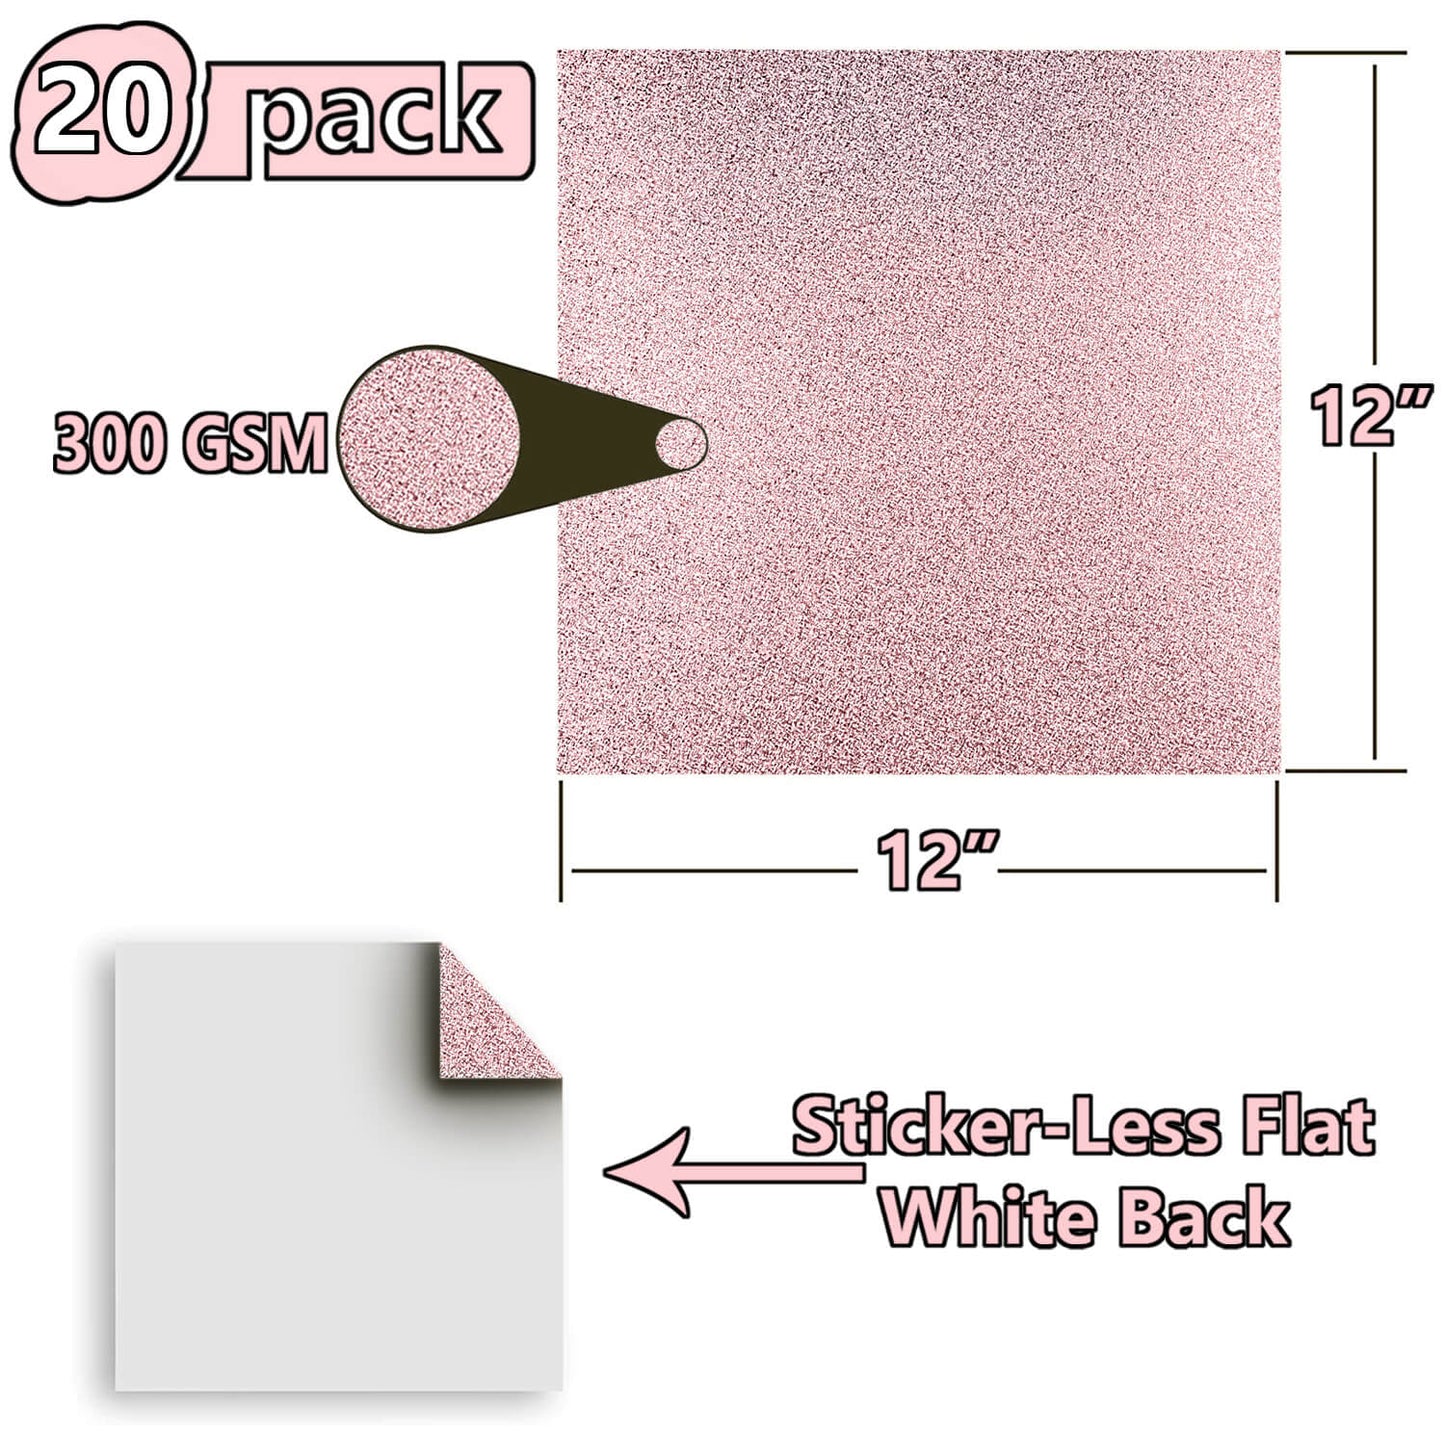 20 Pack - Rose Gold 12x12